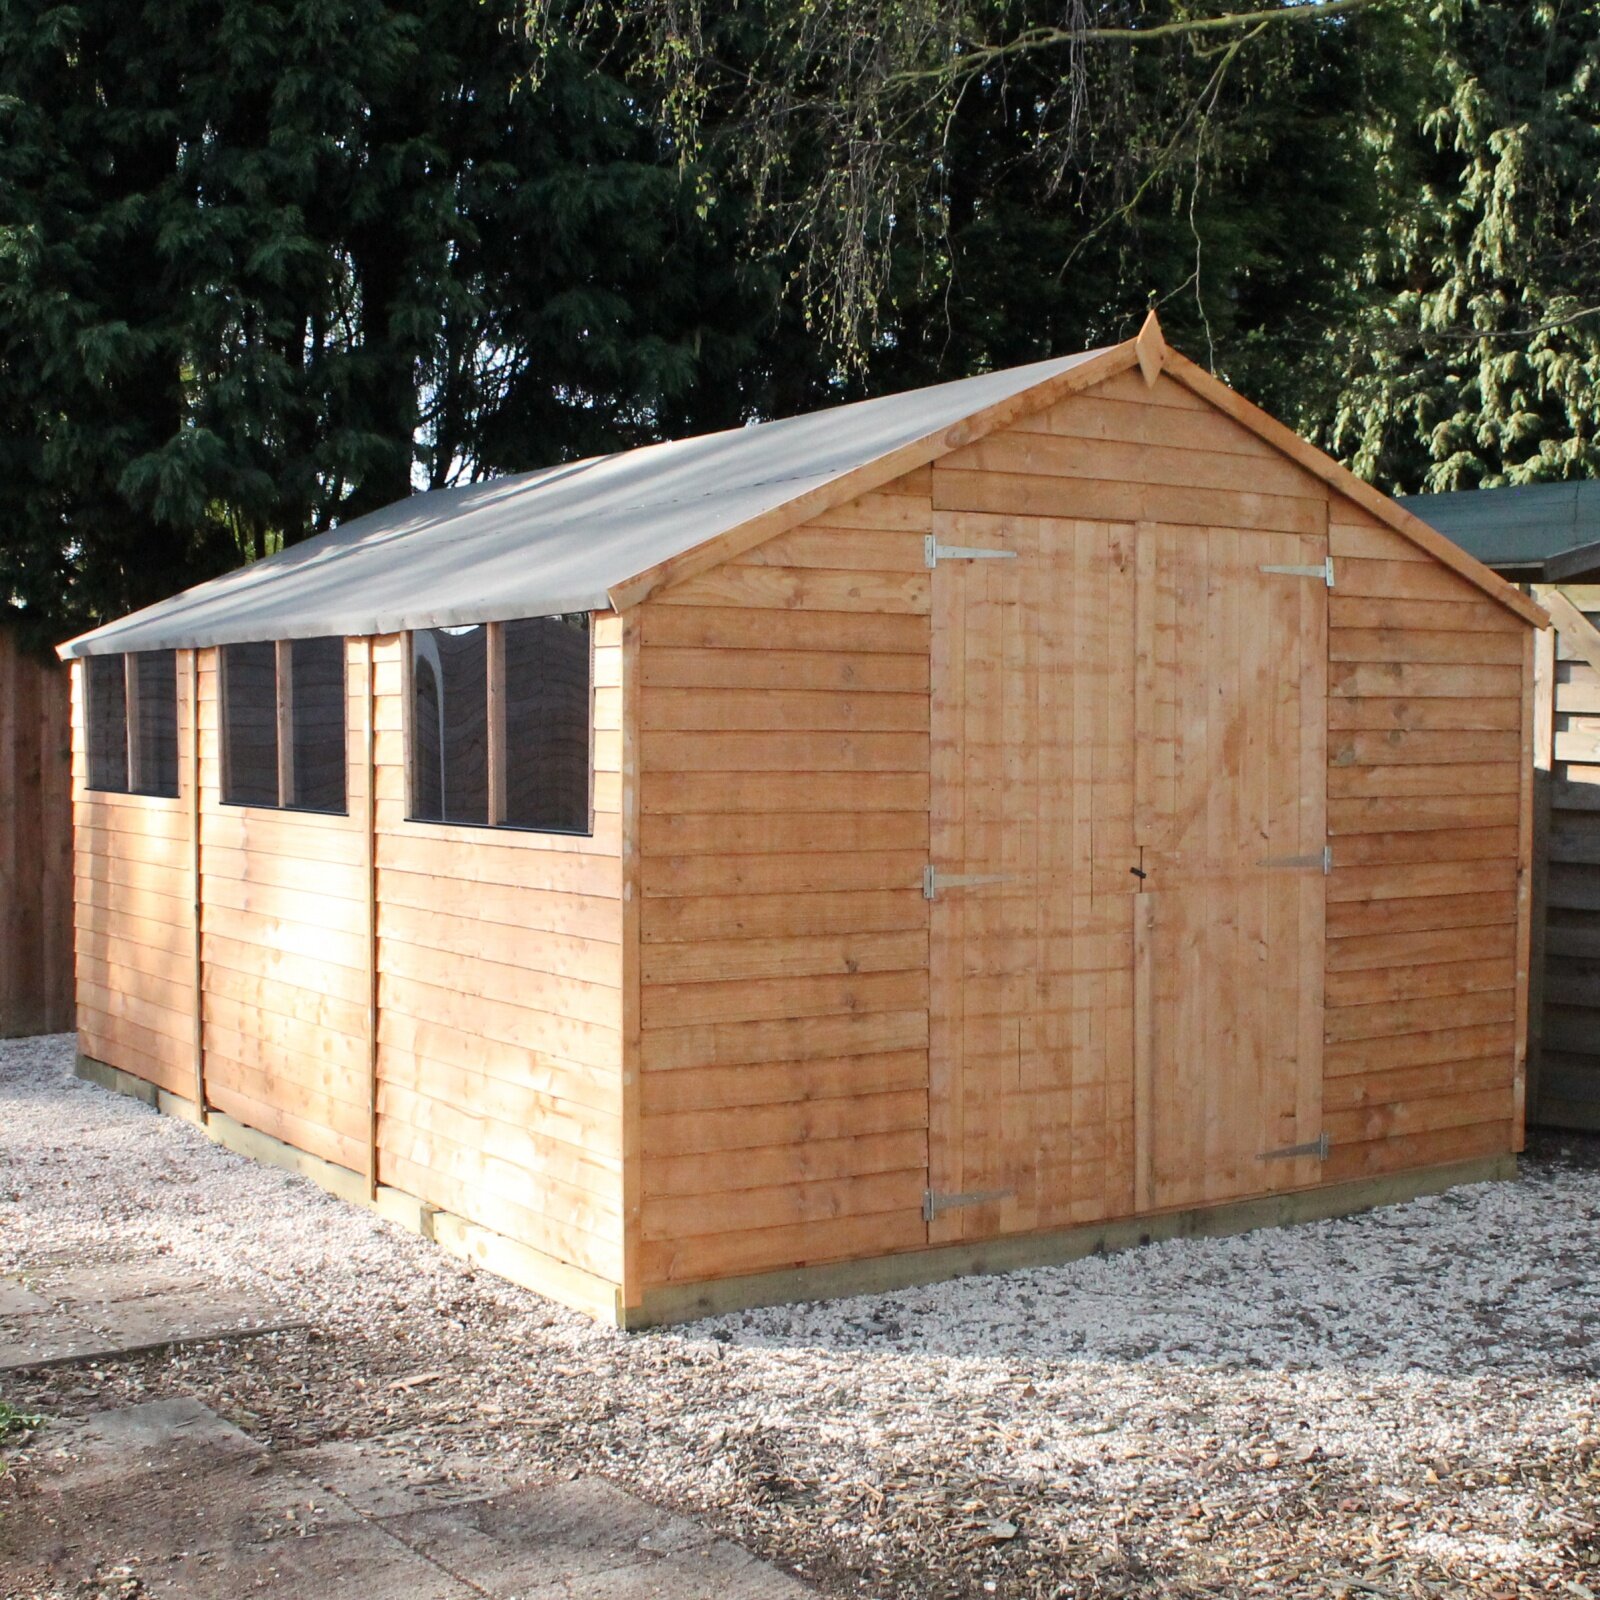 Cold weather outdoor storage sheds